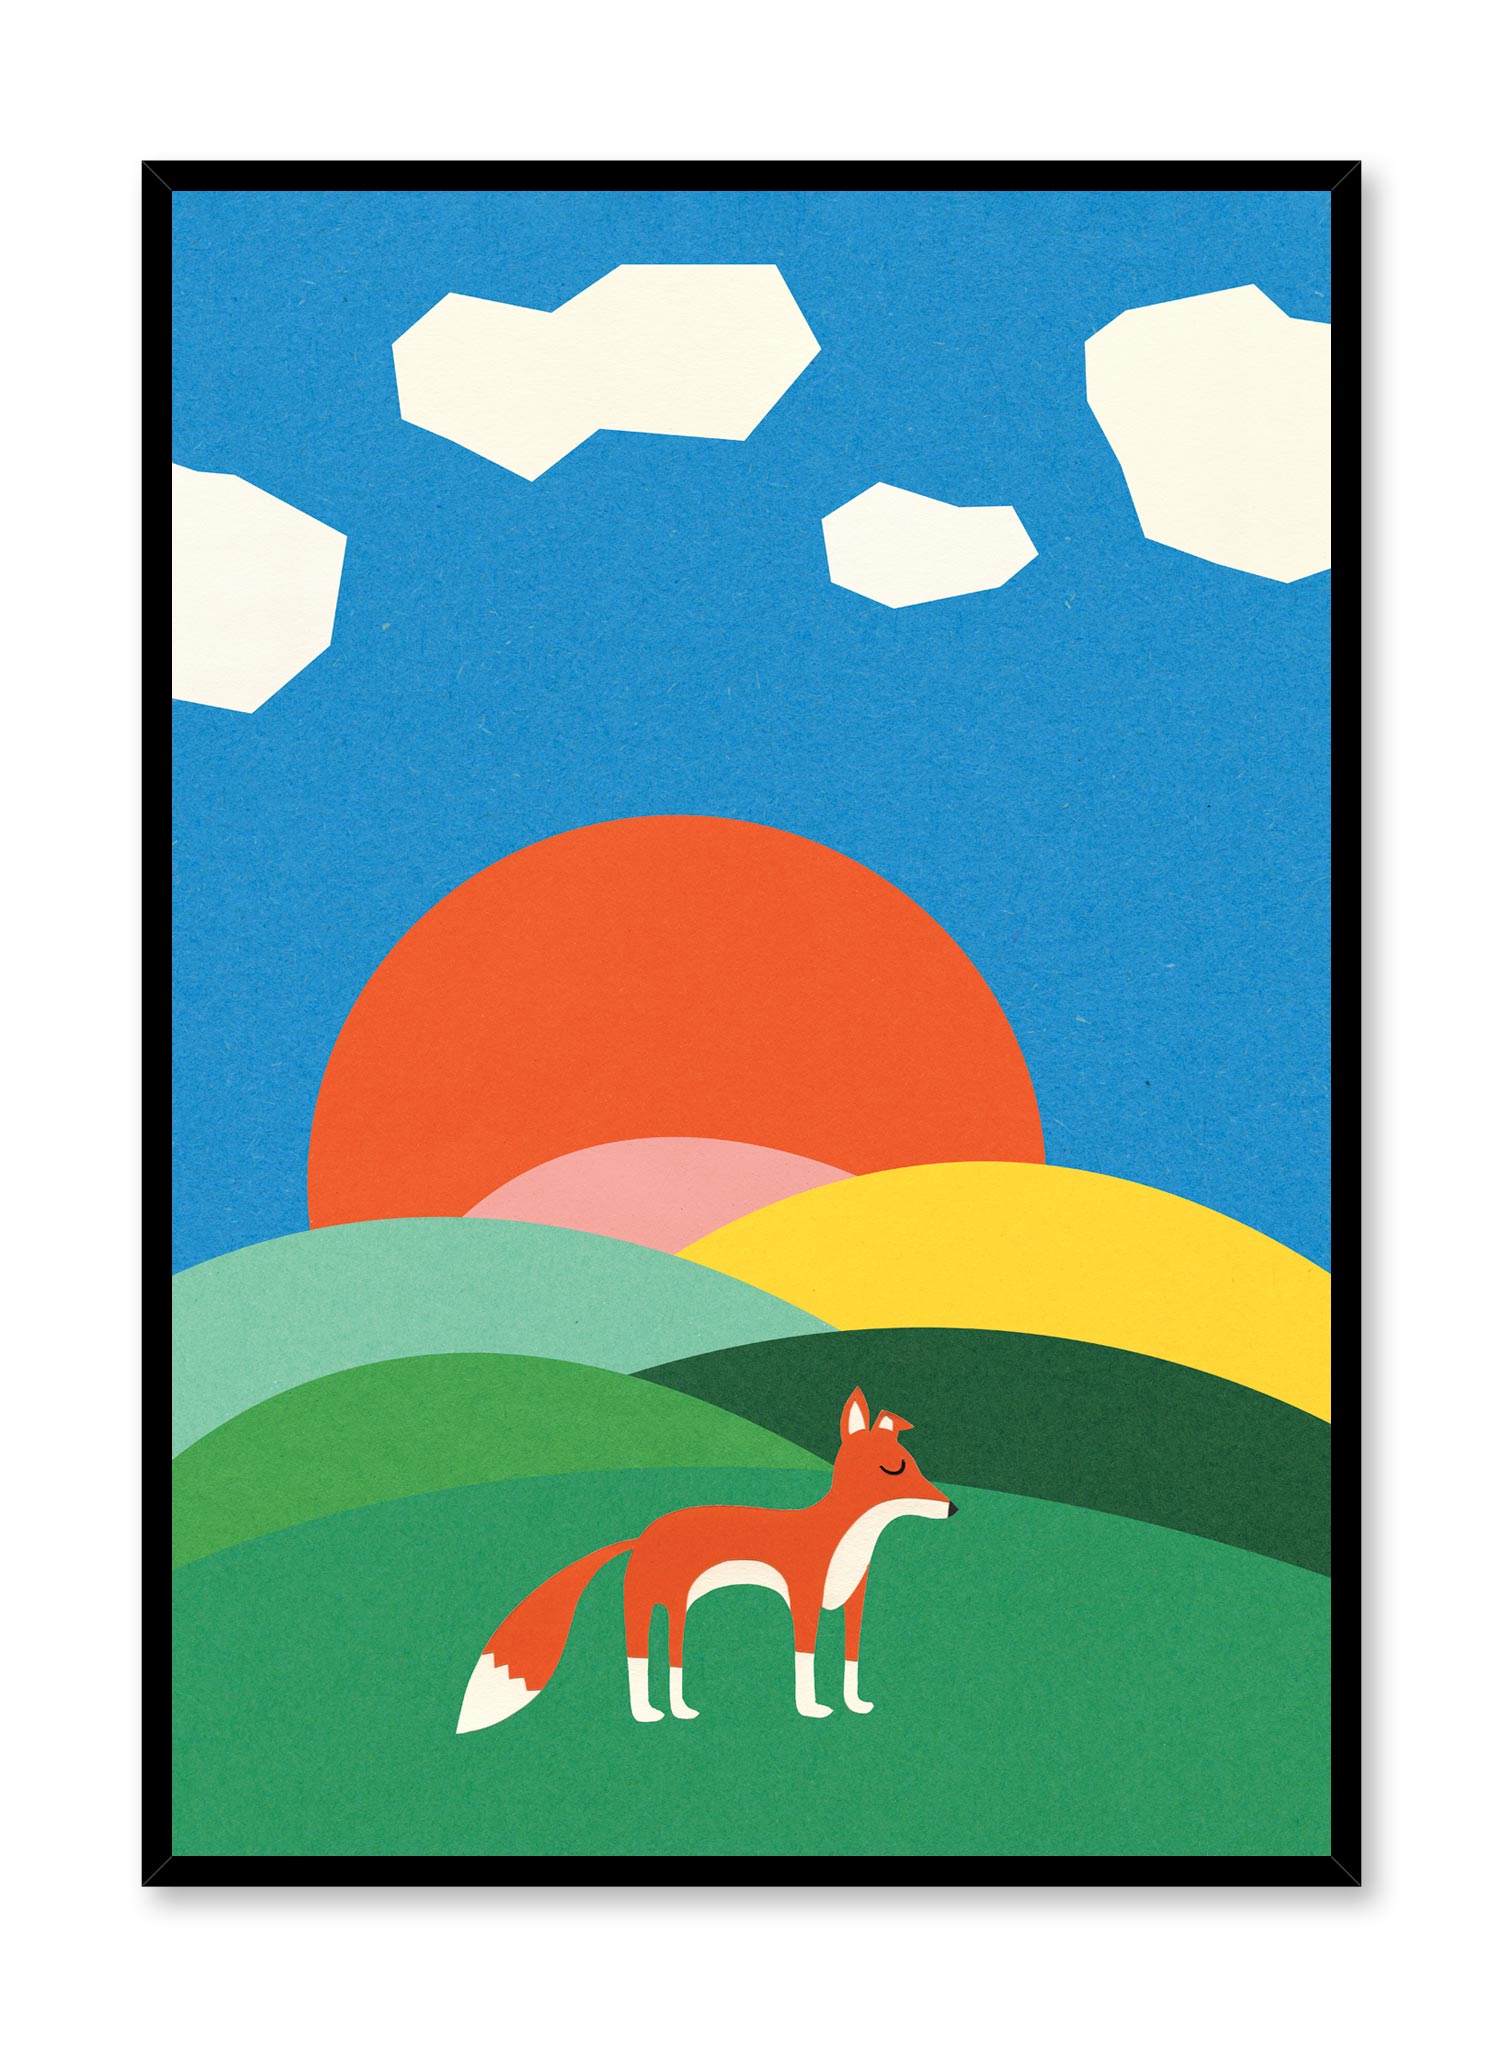 Modern minimalist poster by Opposite Wall with abstract collage illustration of fox in hills